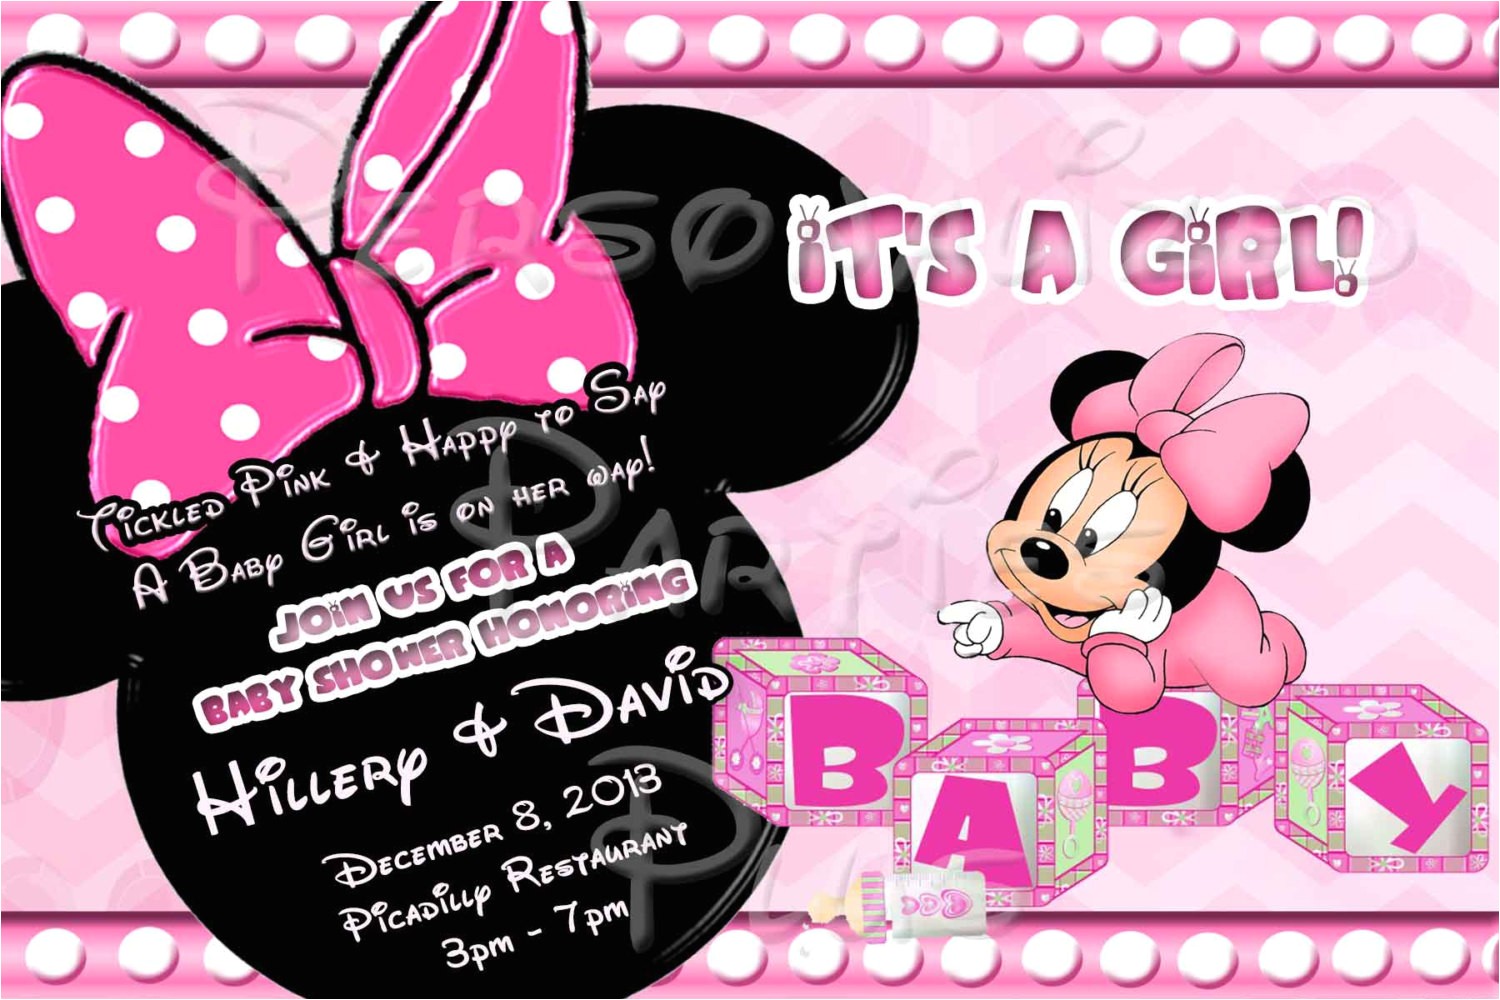 Baby Shower Invitations for Girls Minnie Mouse Baby Minnie Mouse Baby Shower Invitation by Partiesplus On